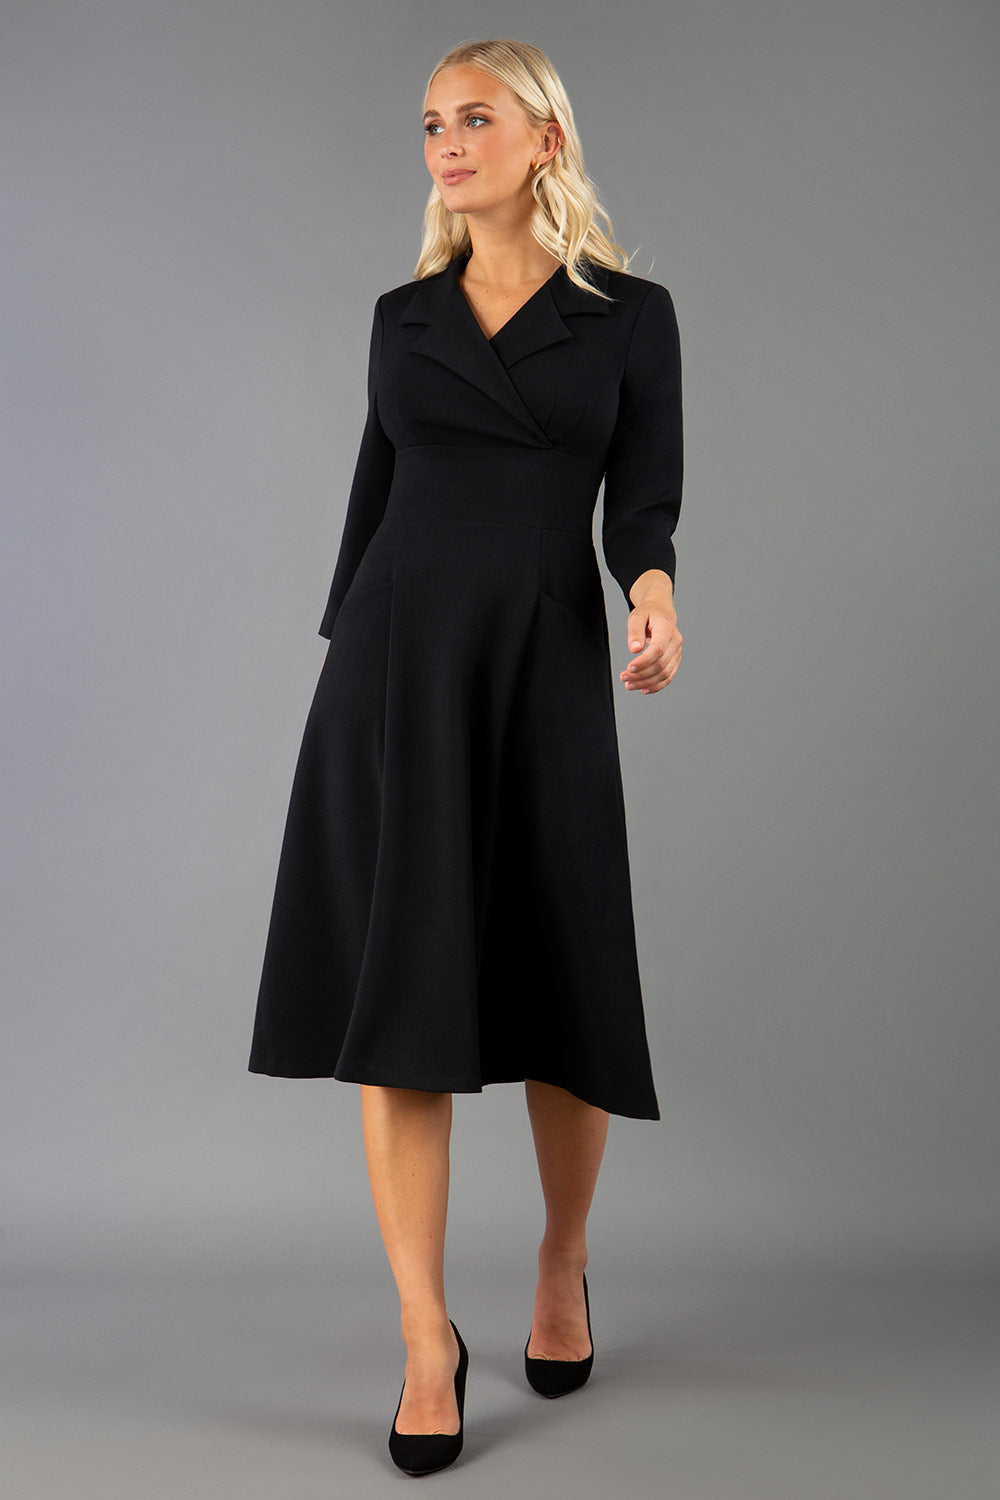 A blonde model is wearing a swing black three quarter sleeve dress with oversized collar and pockets in the skirt  